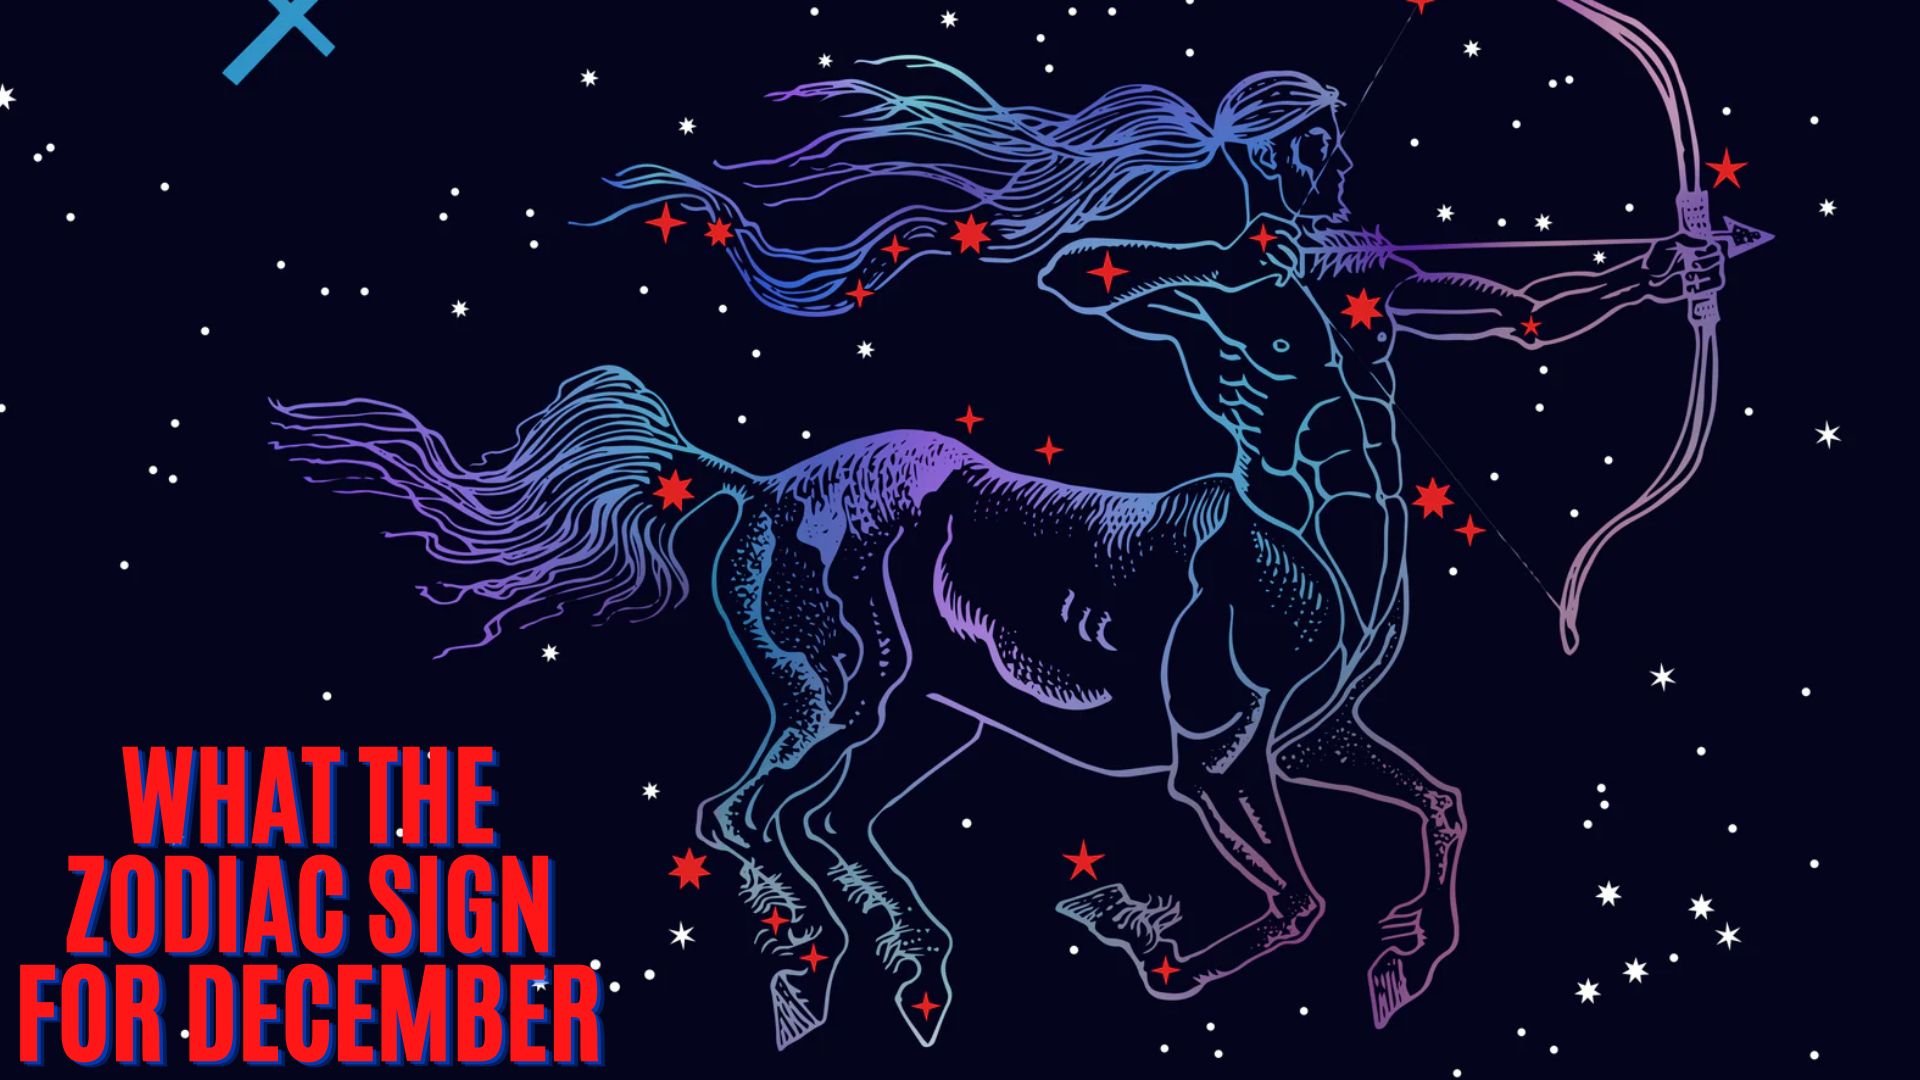 What Is The Zodiac Sign For December?